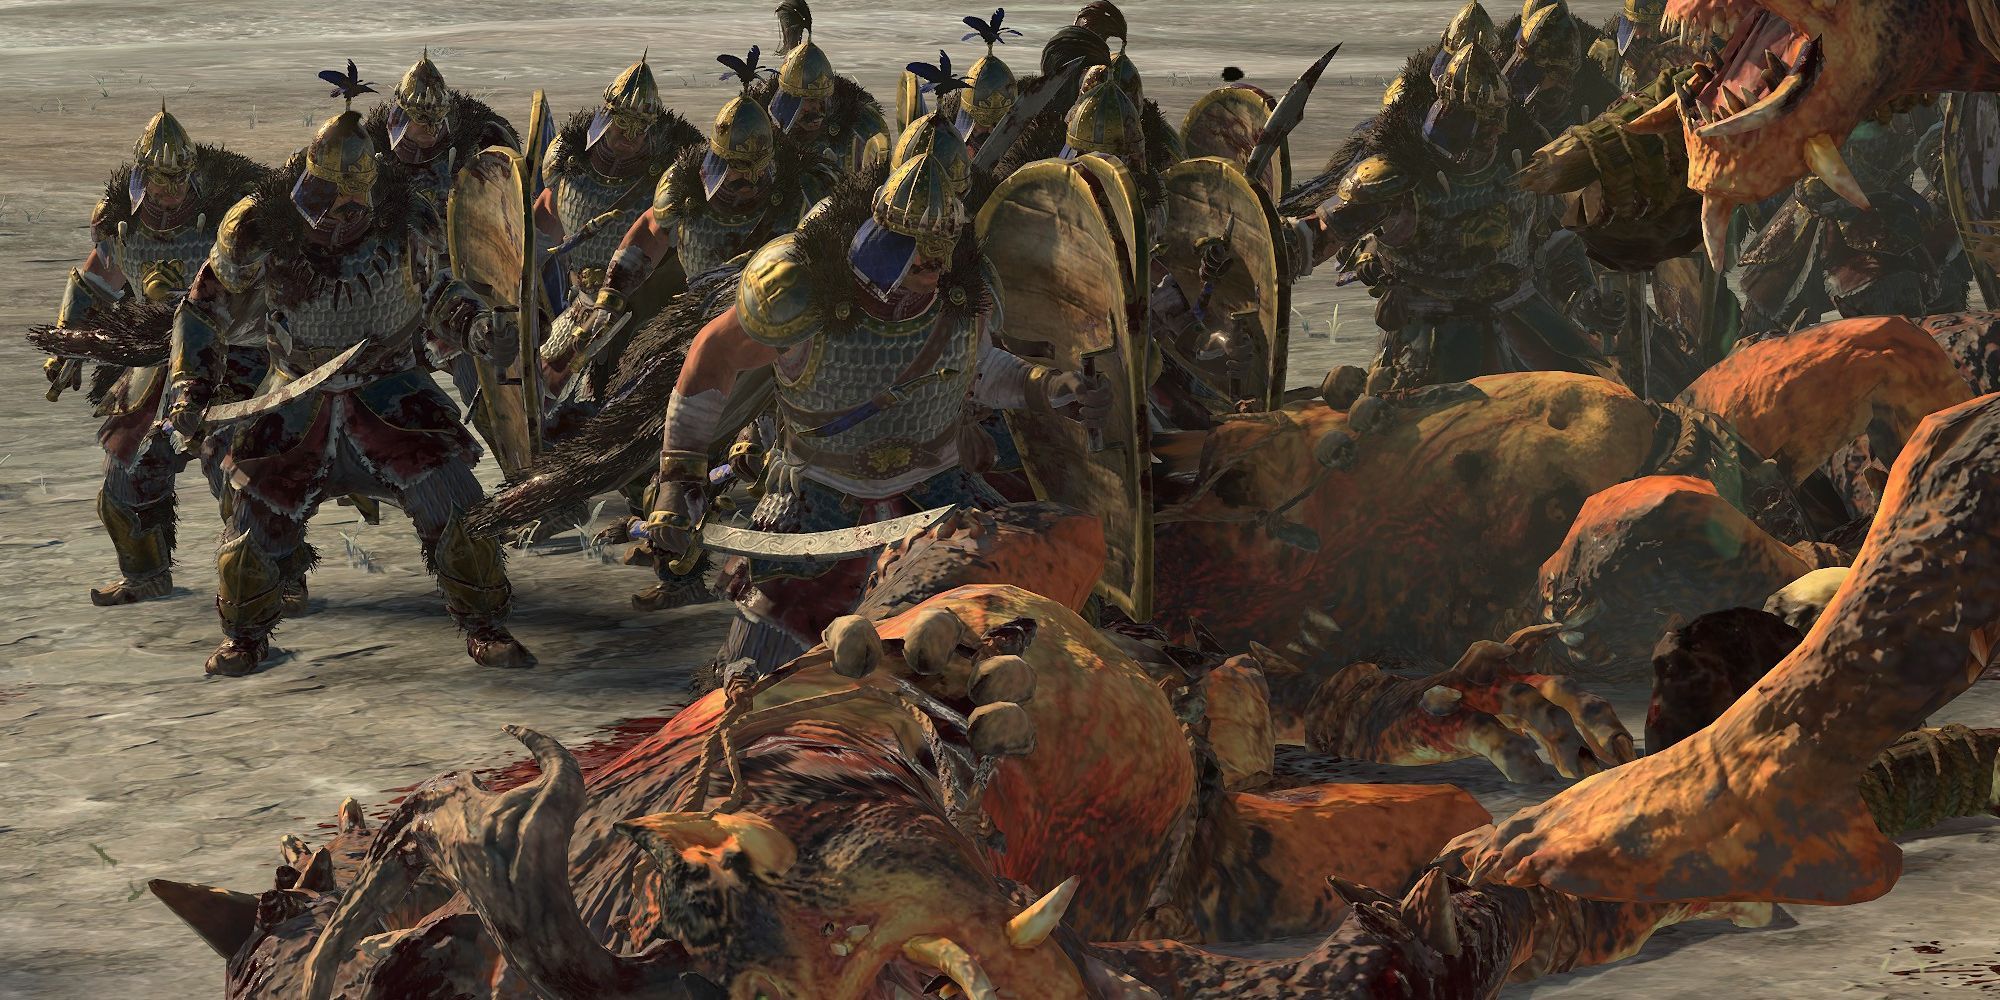 Tzar Guard standing over defeated trolls